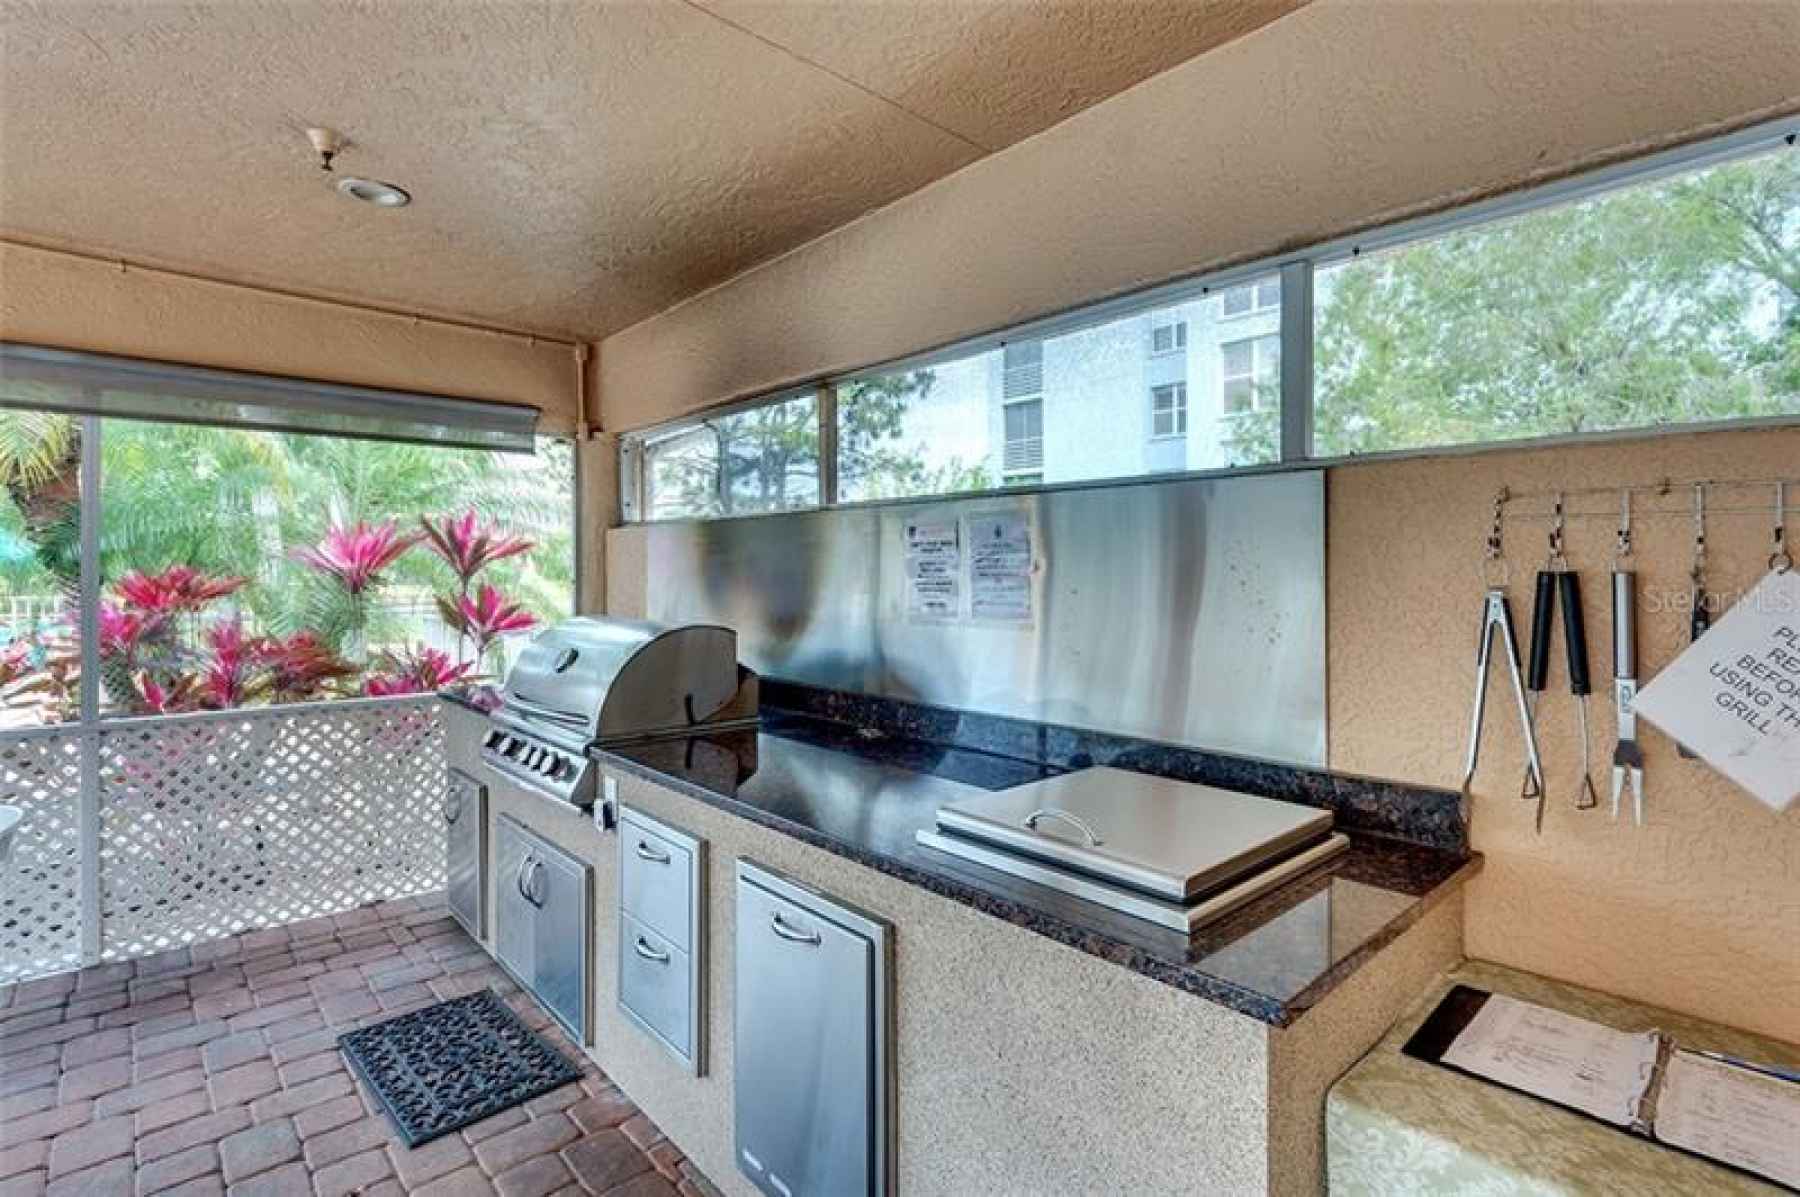 Wow look at this outdoor kitchen available for all the residents.